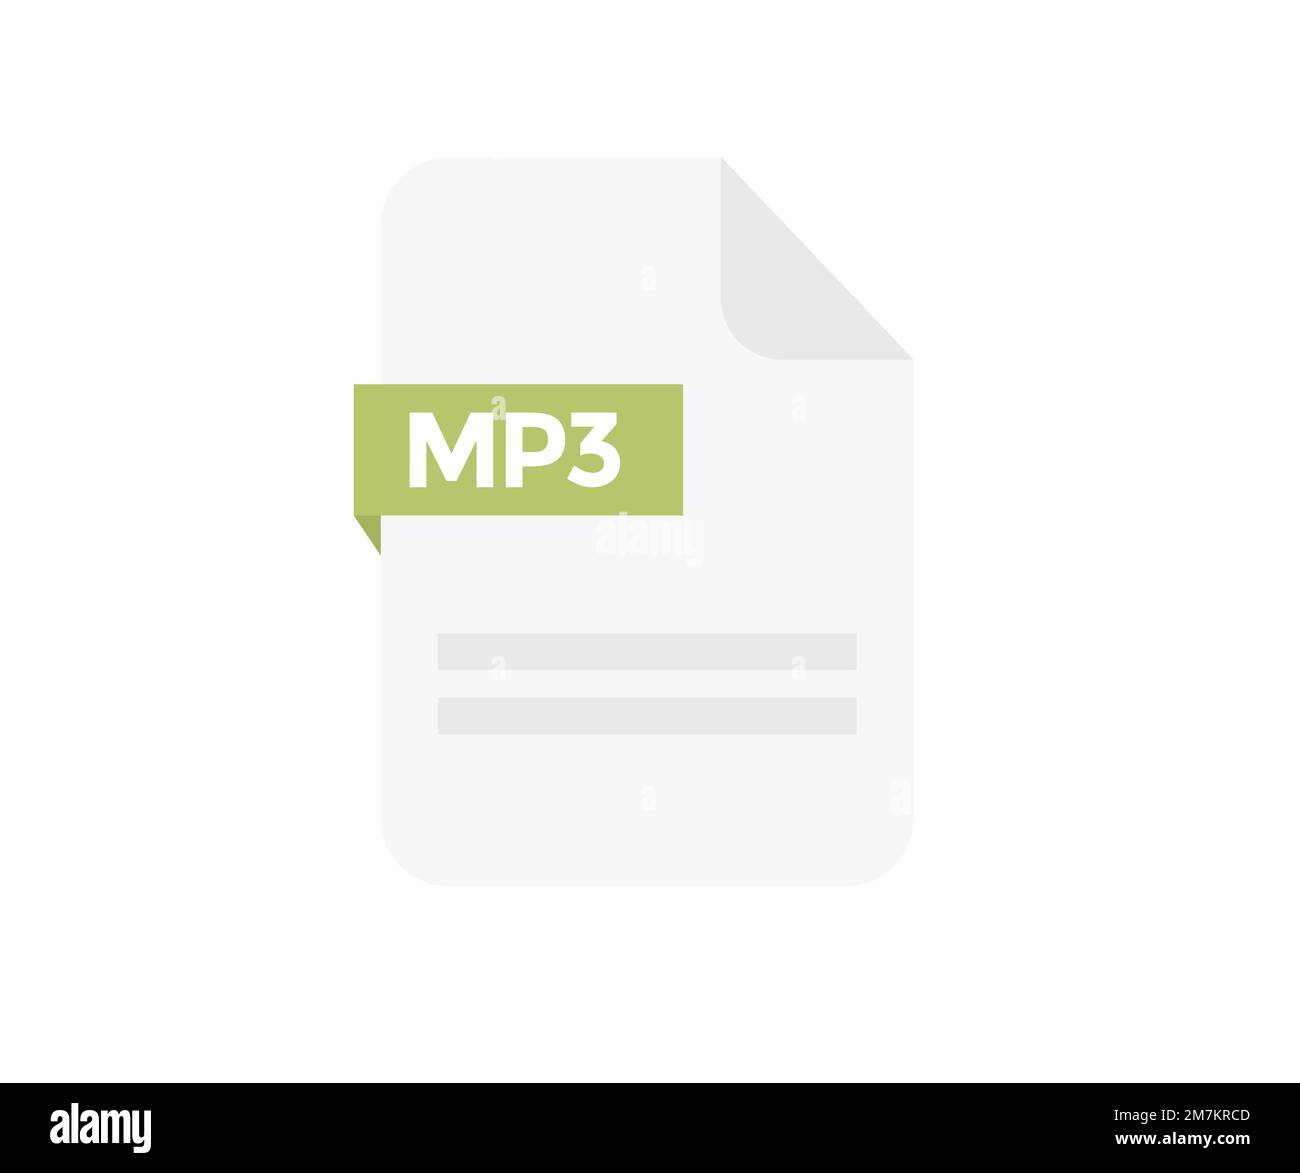 File format MP3 logo design. Document file icon, internet, extension, sign, type, presentation, graphic, application. Element for applications. Stock Vector